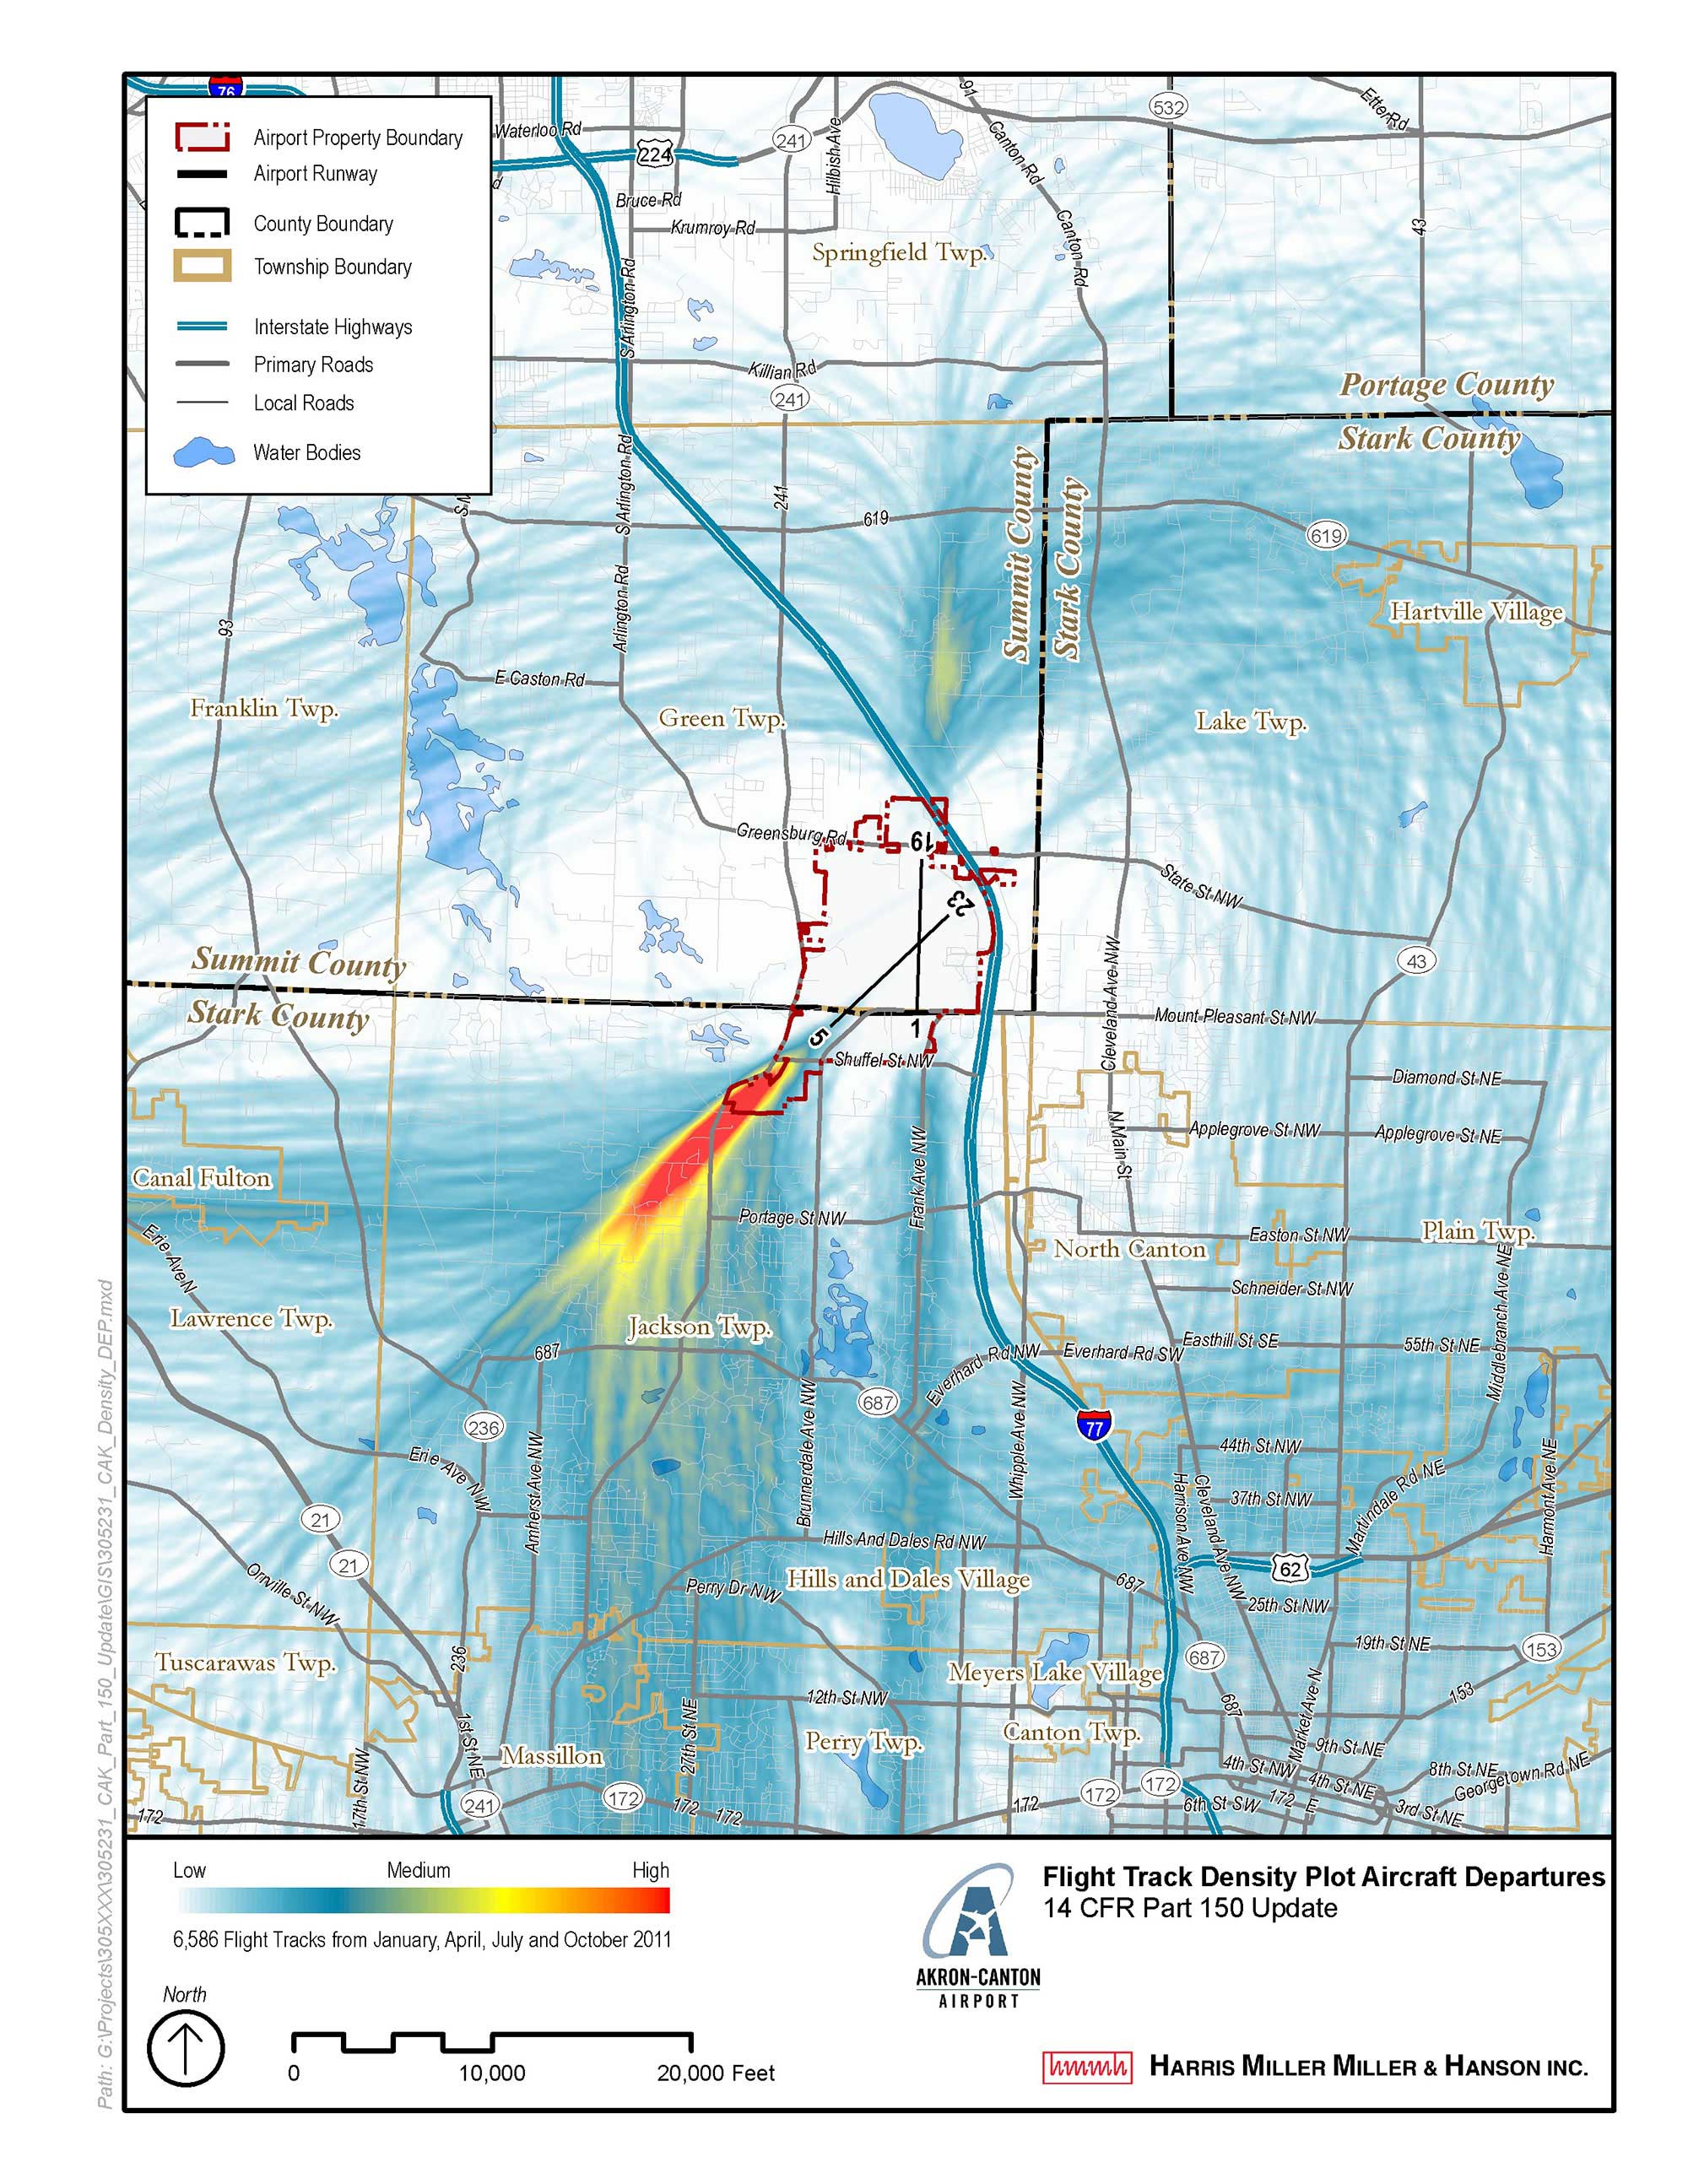 Master Plan and Noise Compatibility Planning (Part 150), Akron-Canton Airport